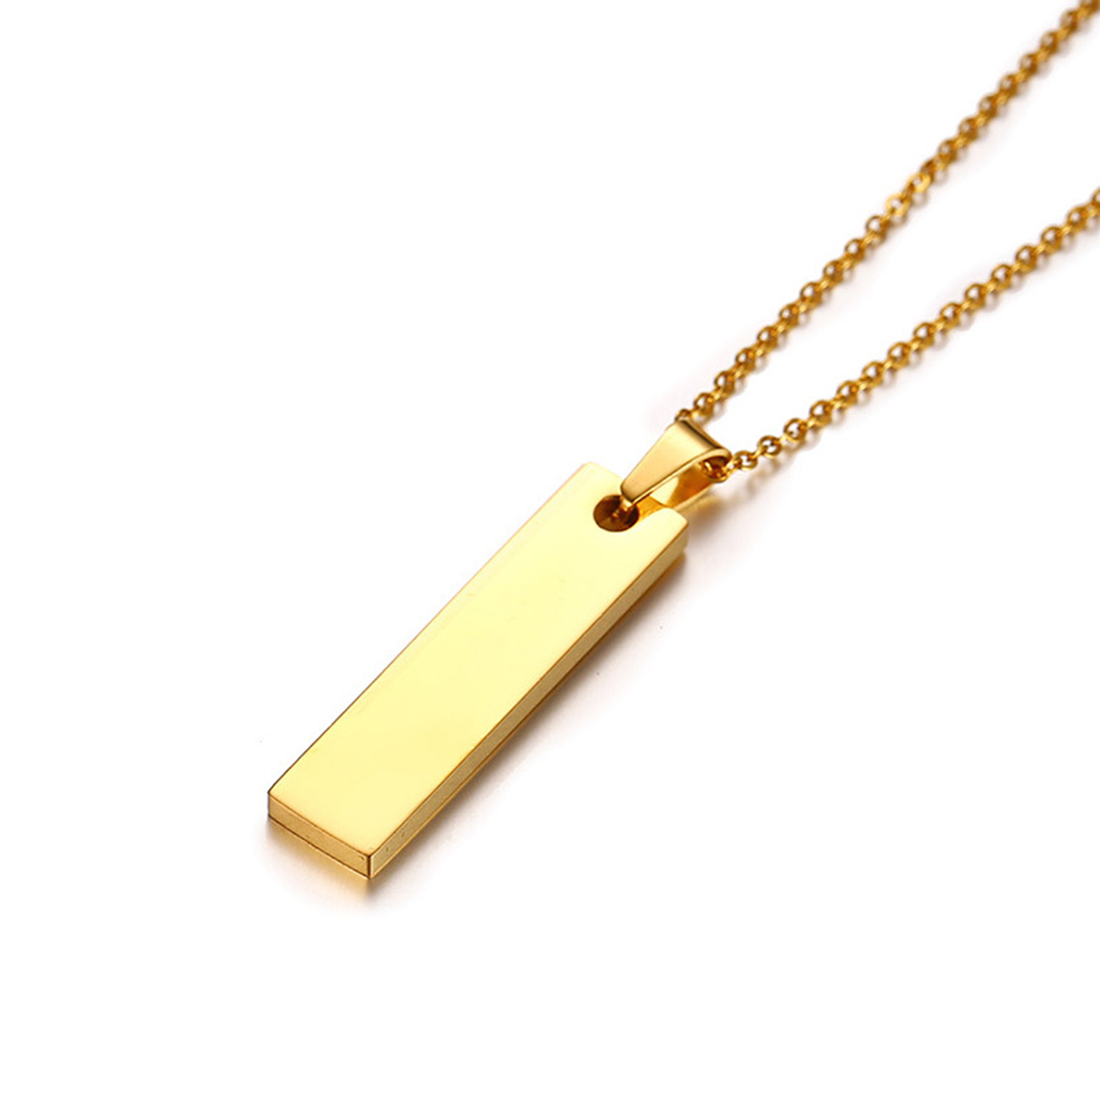 1:gold color plated